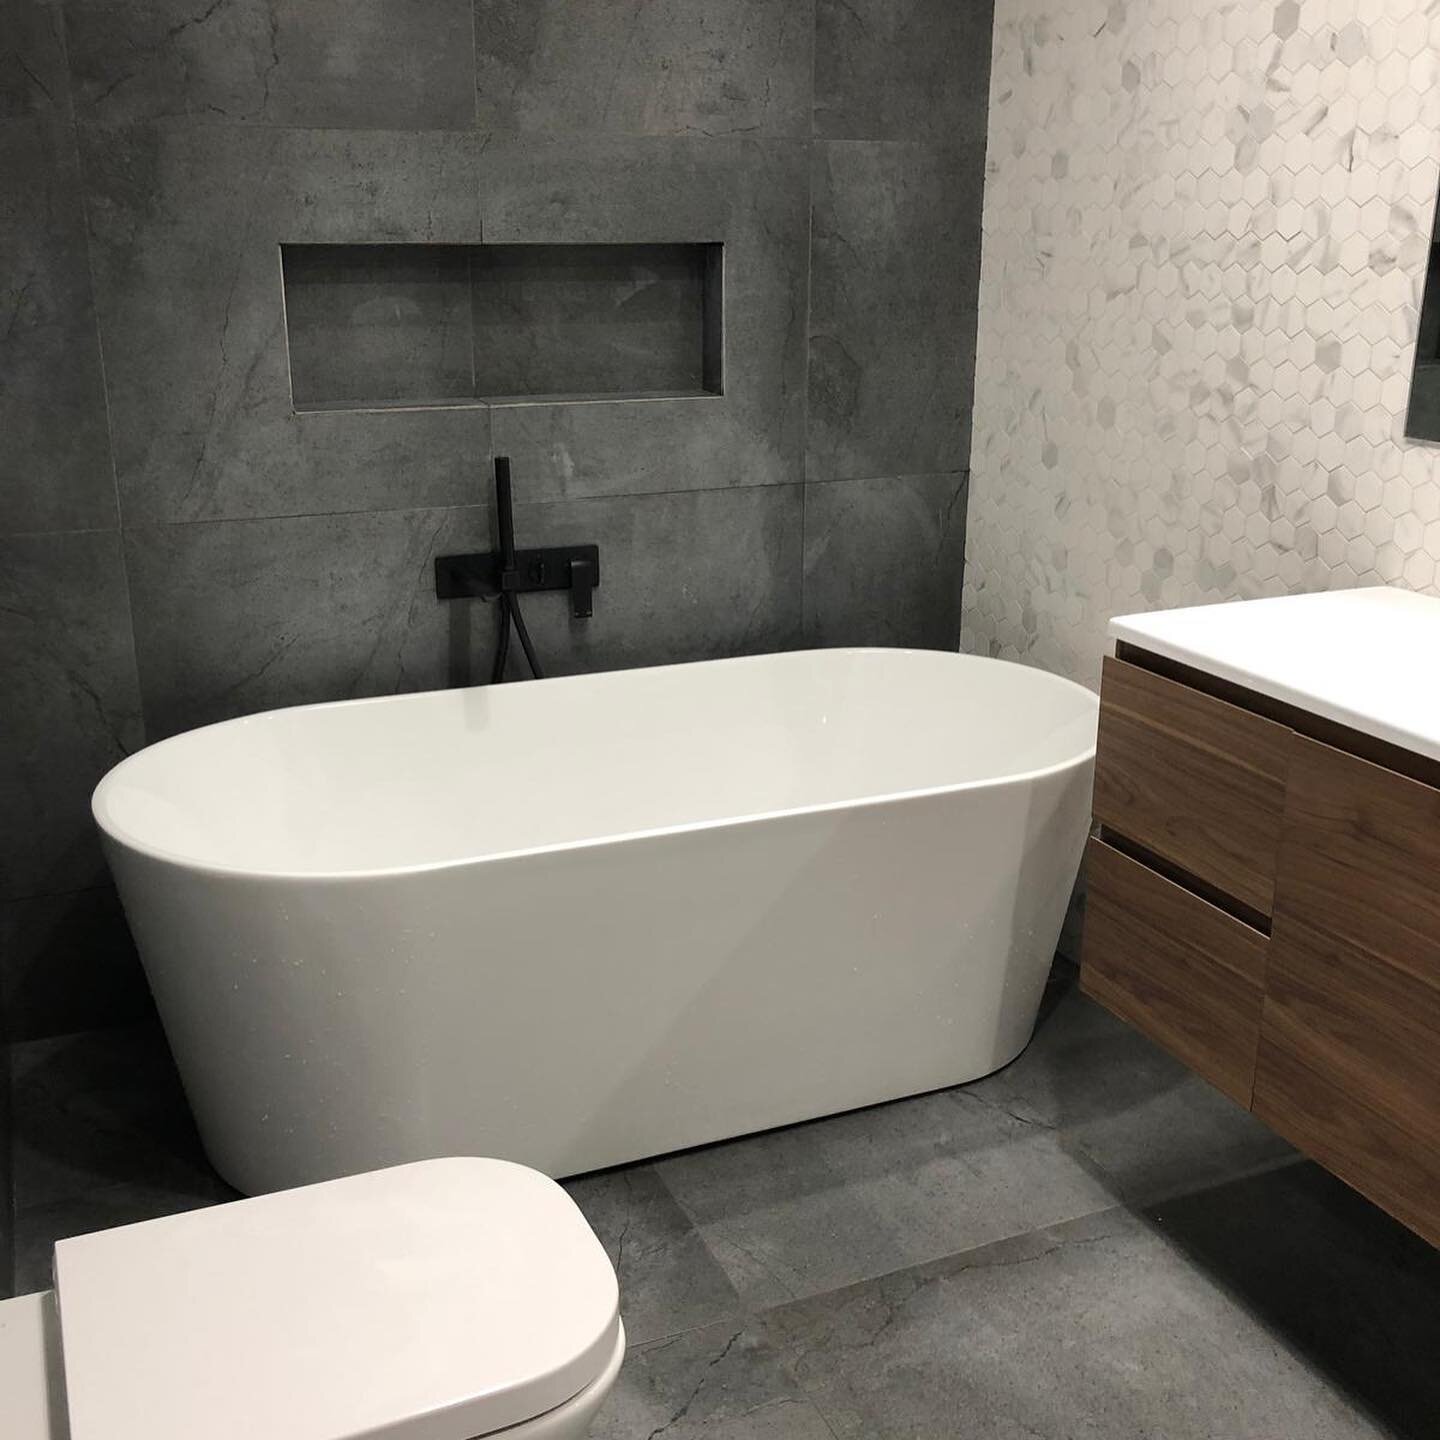 Bathrooms and en-suite looking the goods at Edna.